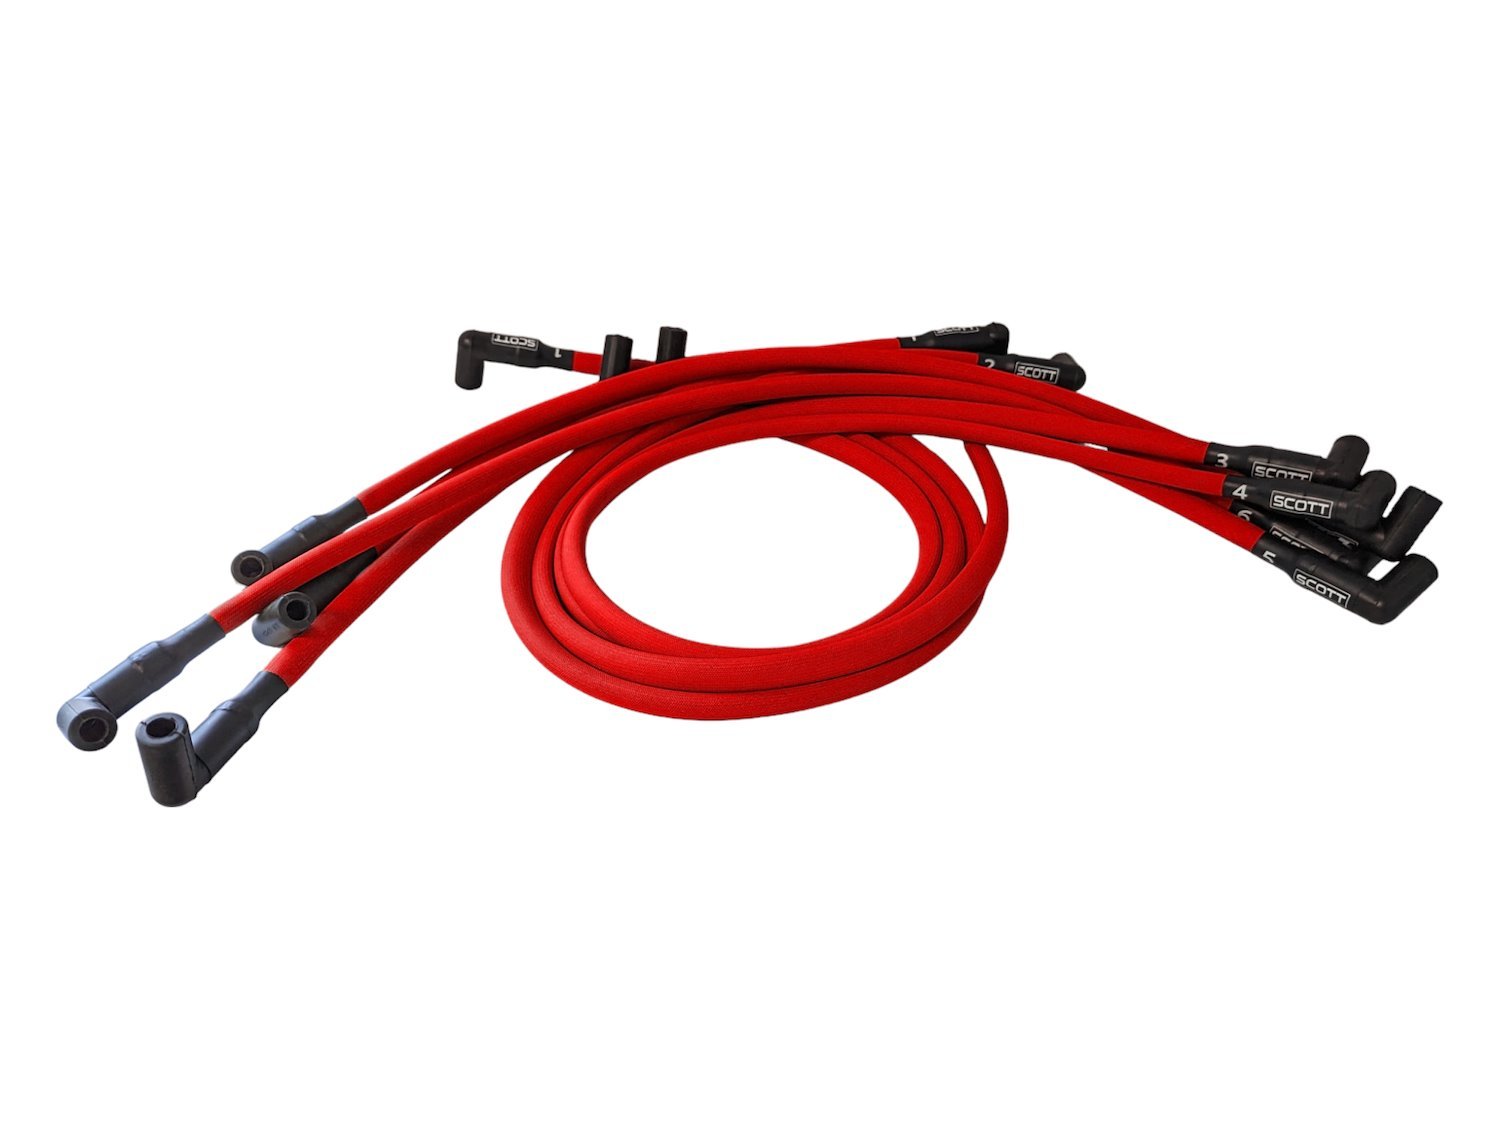 SPW300-PS-435-2 Super Mag Fiberglass-Oversleeved Spark Plug Wire Set for Small Block Chevy, Around Front [Red]